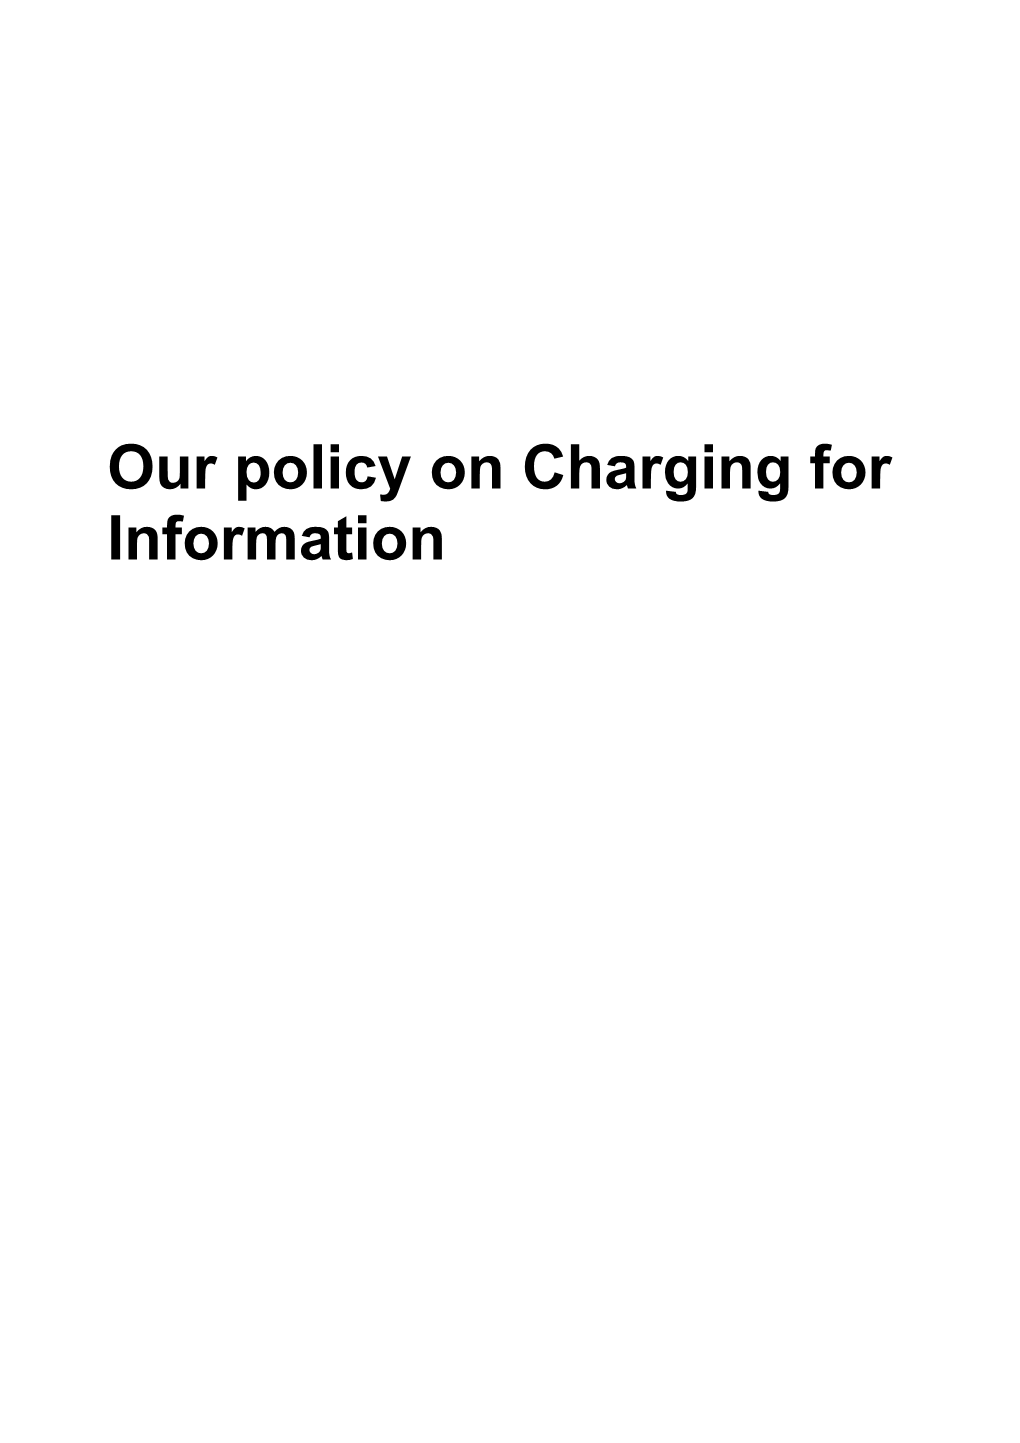 Information Charging Policy